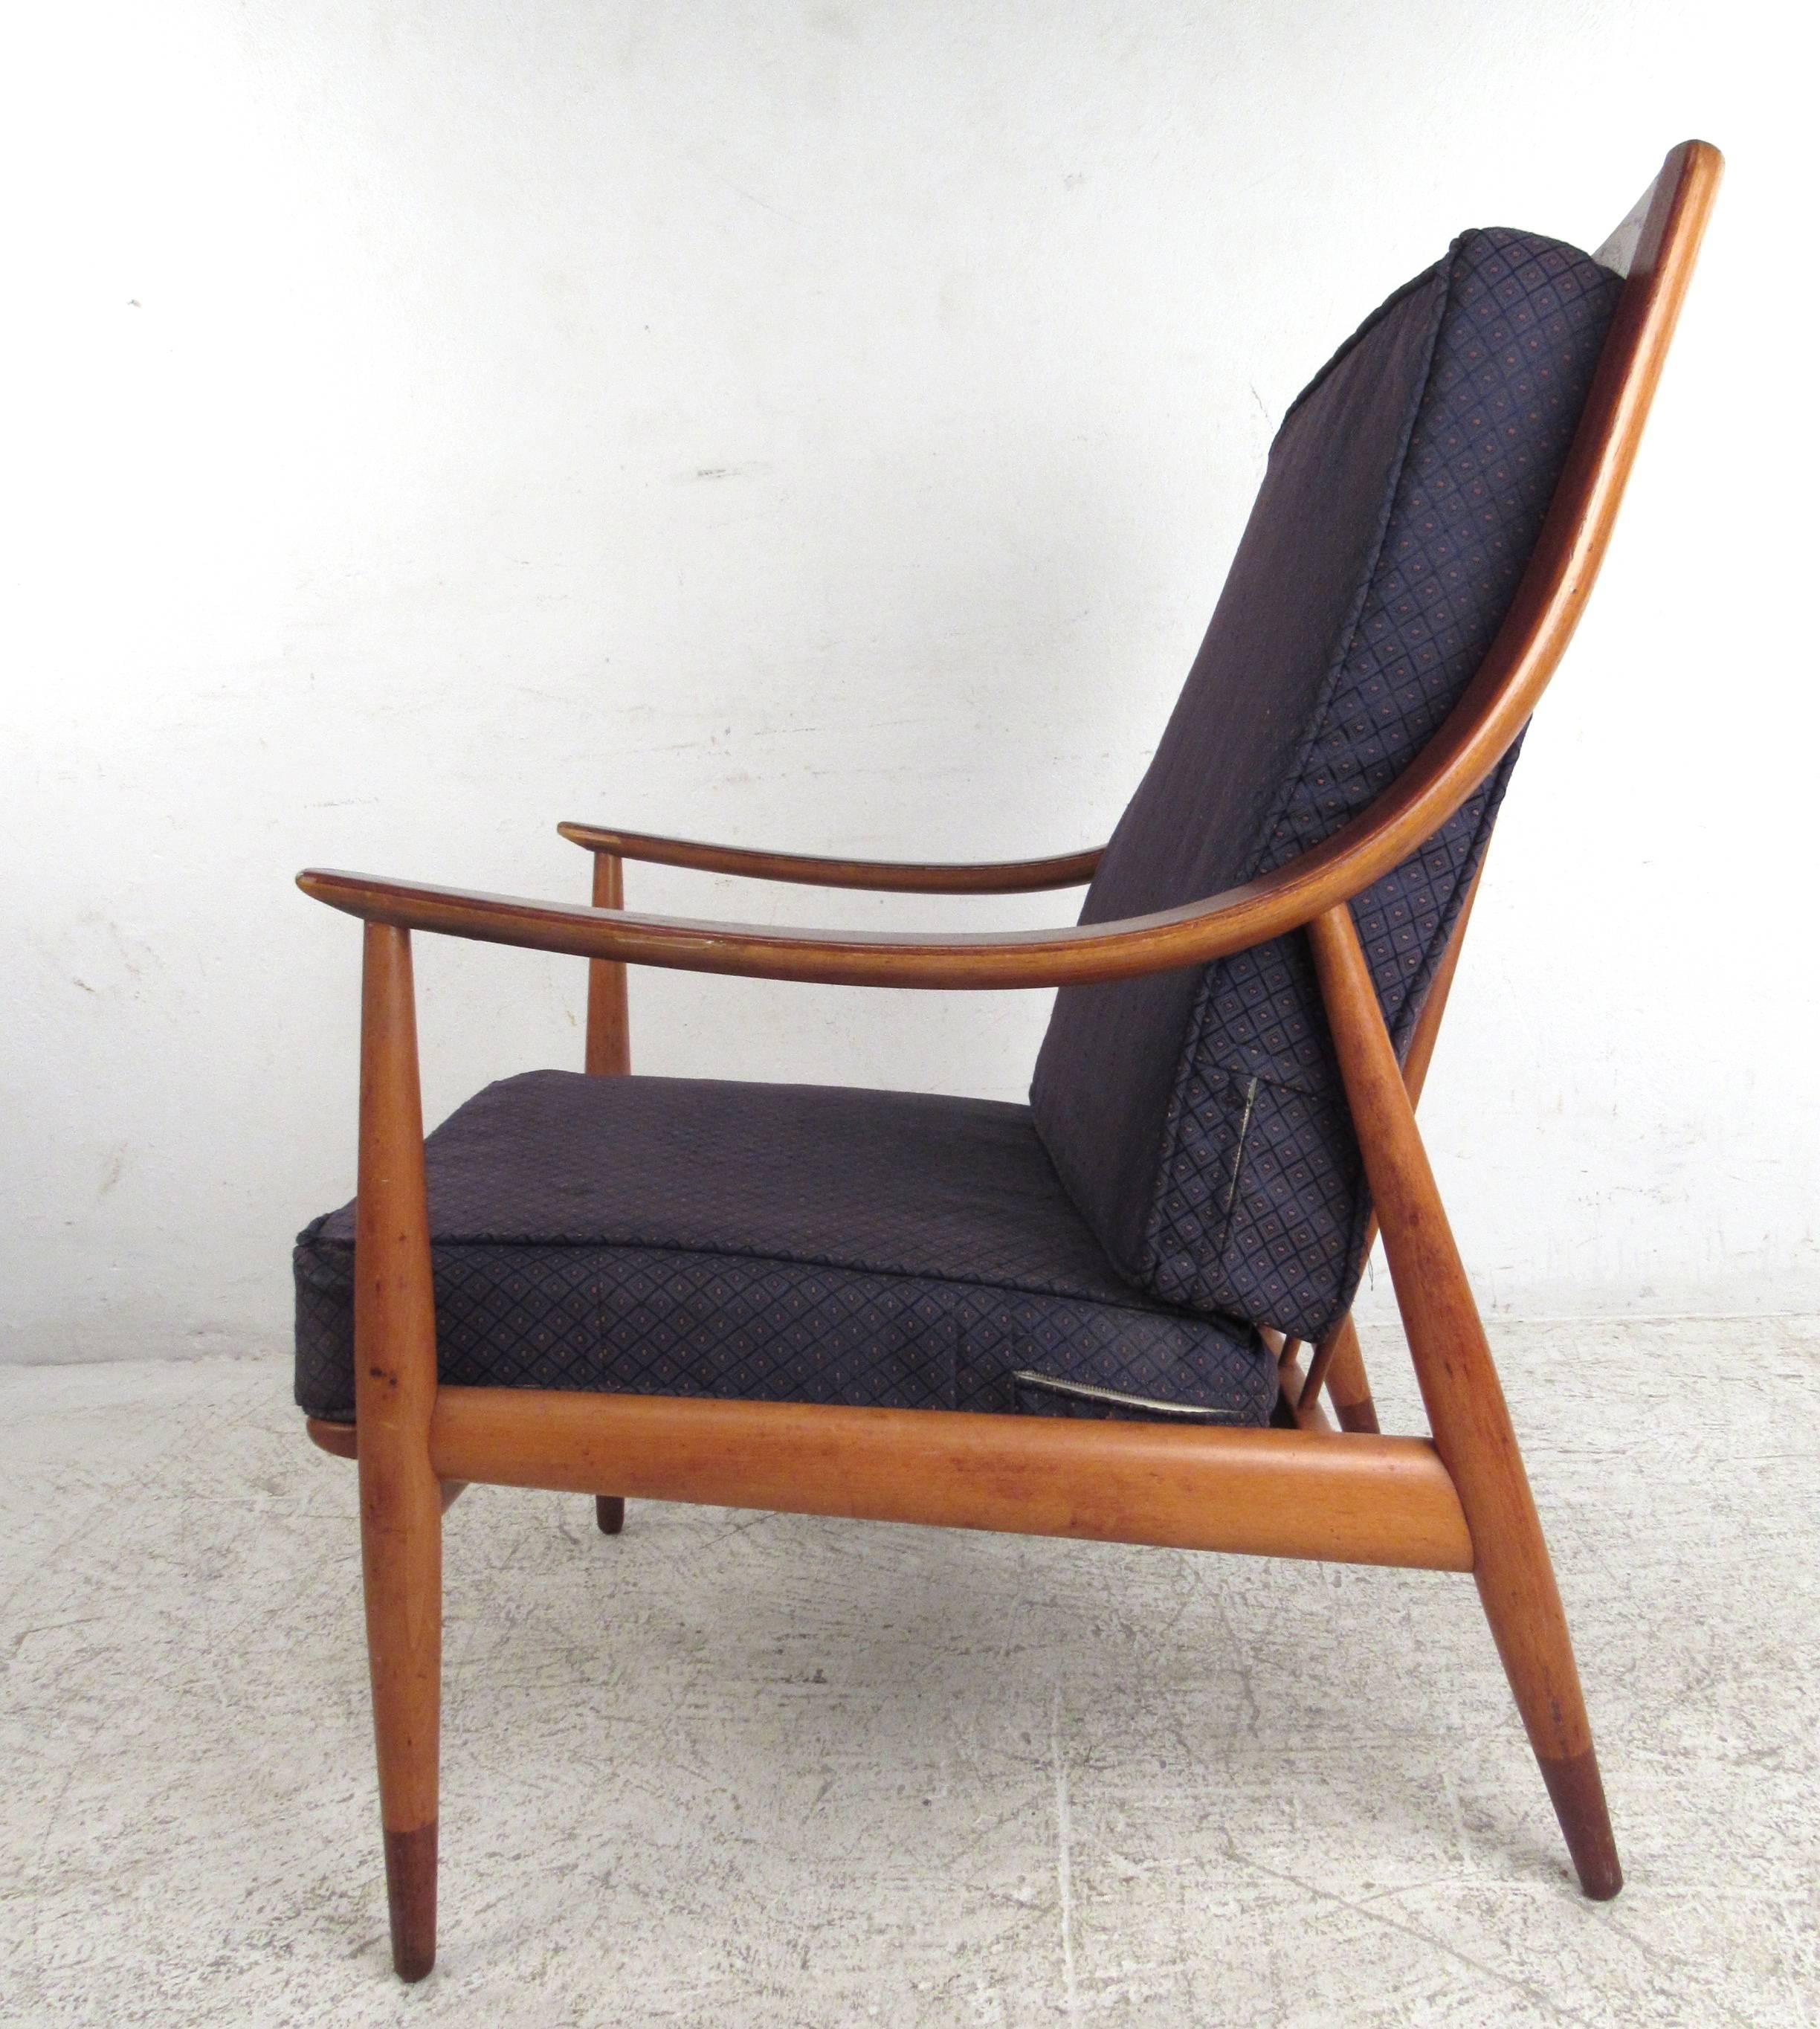 Bring home a fantastic example of Danish mid-century modern design with the highly collectible FD-146 easy chair by Peter Hvidt and Orla Mølgaard-Nielsen.  Distributed in the American market for John Stuart Inc, this chair features a variety of